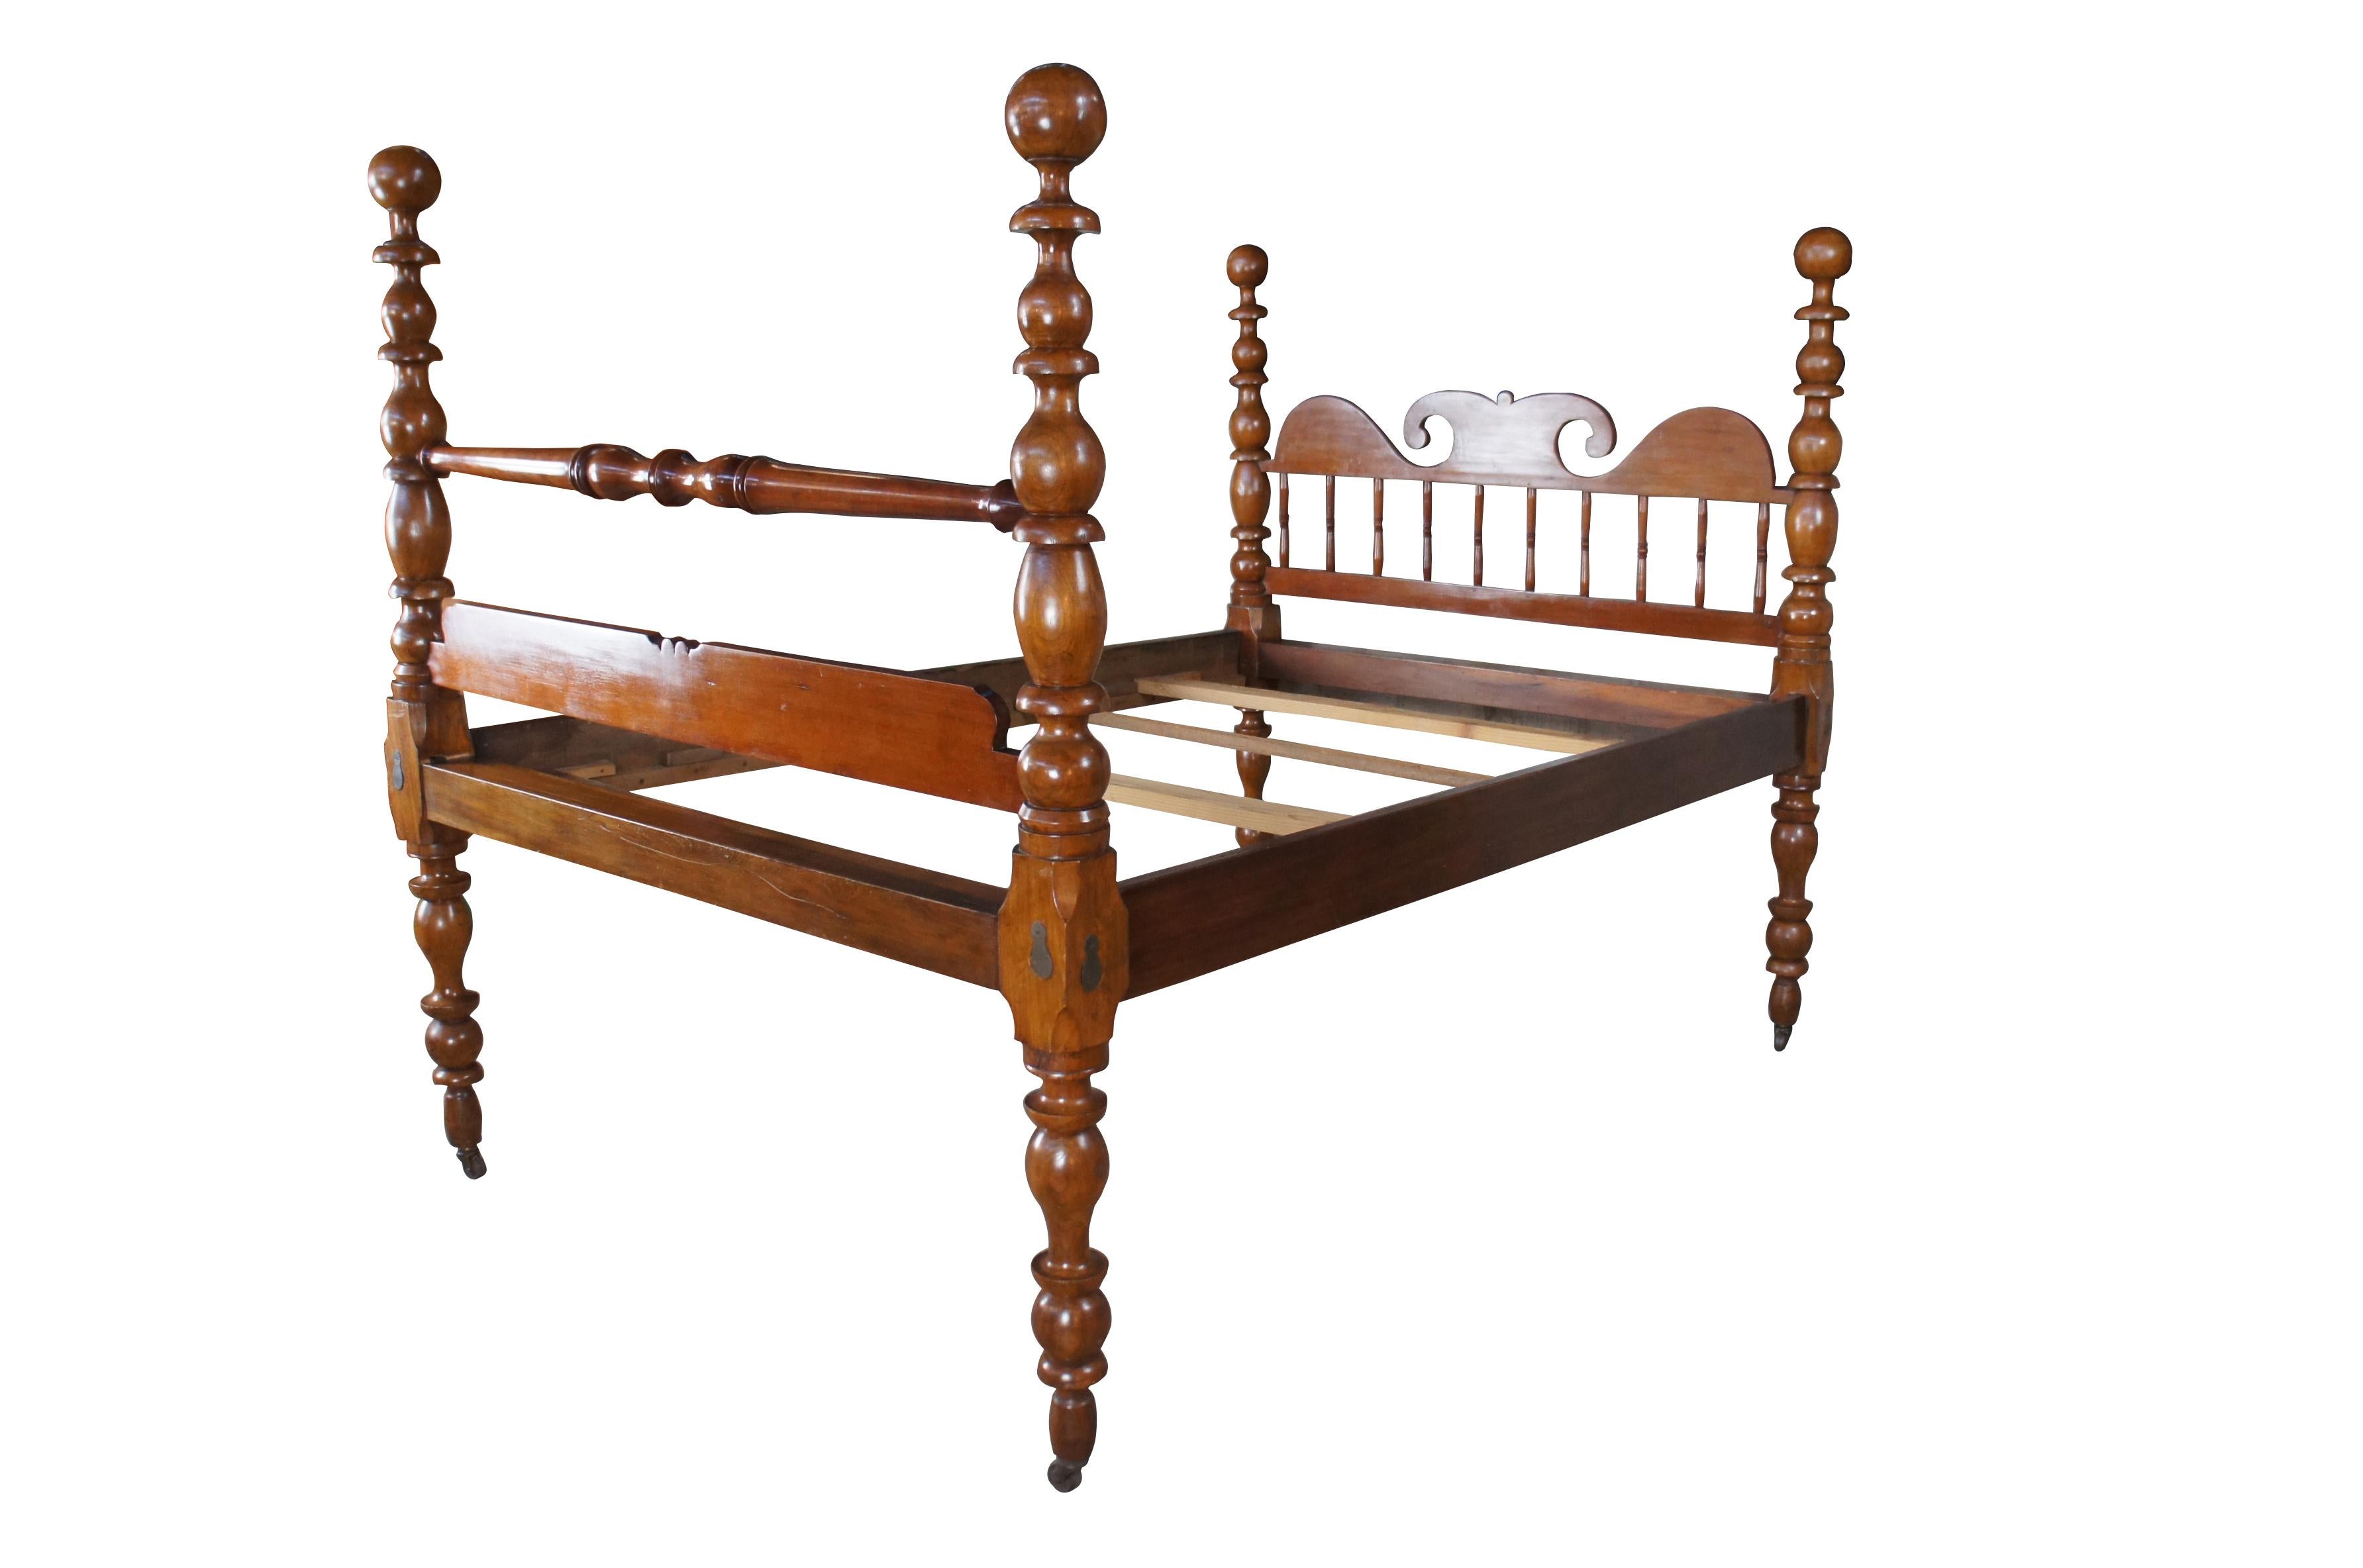 Antique 19th century cannonball post bed.  Made of cherry with traditional Colonial styling that features reticulated headboard with serpentine crest and tall turned posts.

Dimensions:
60